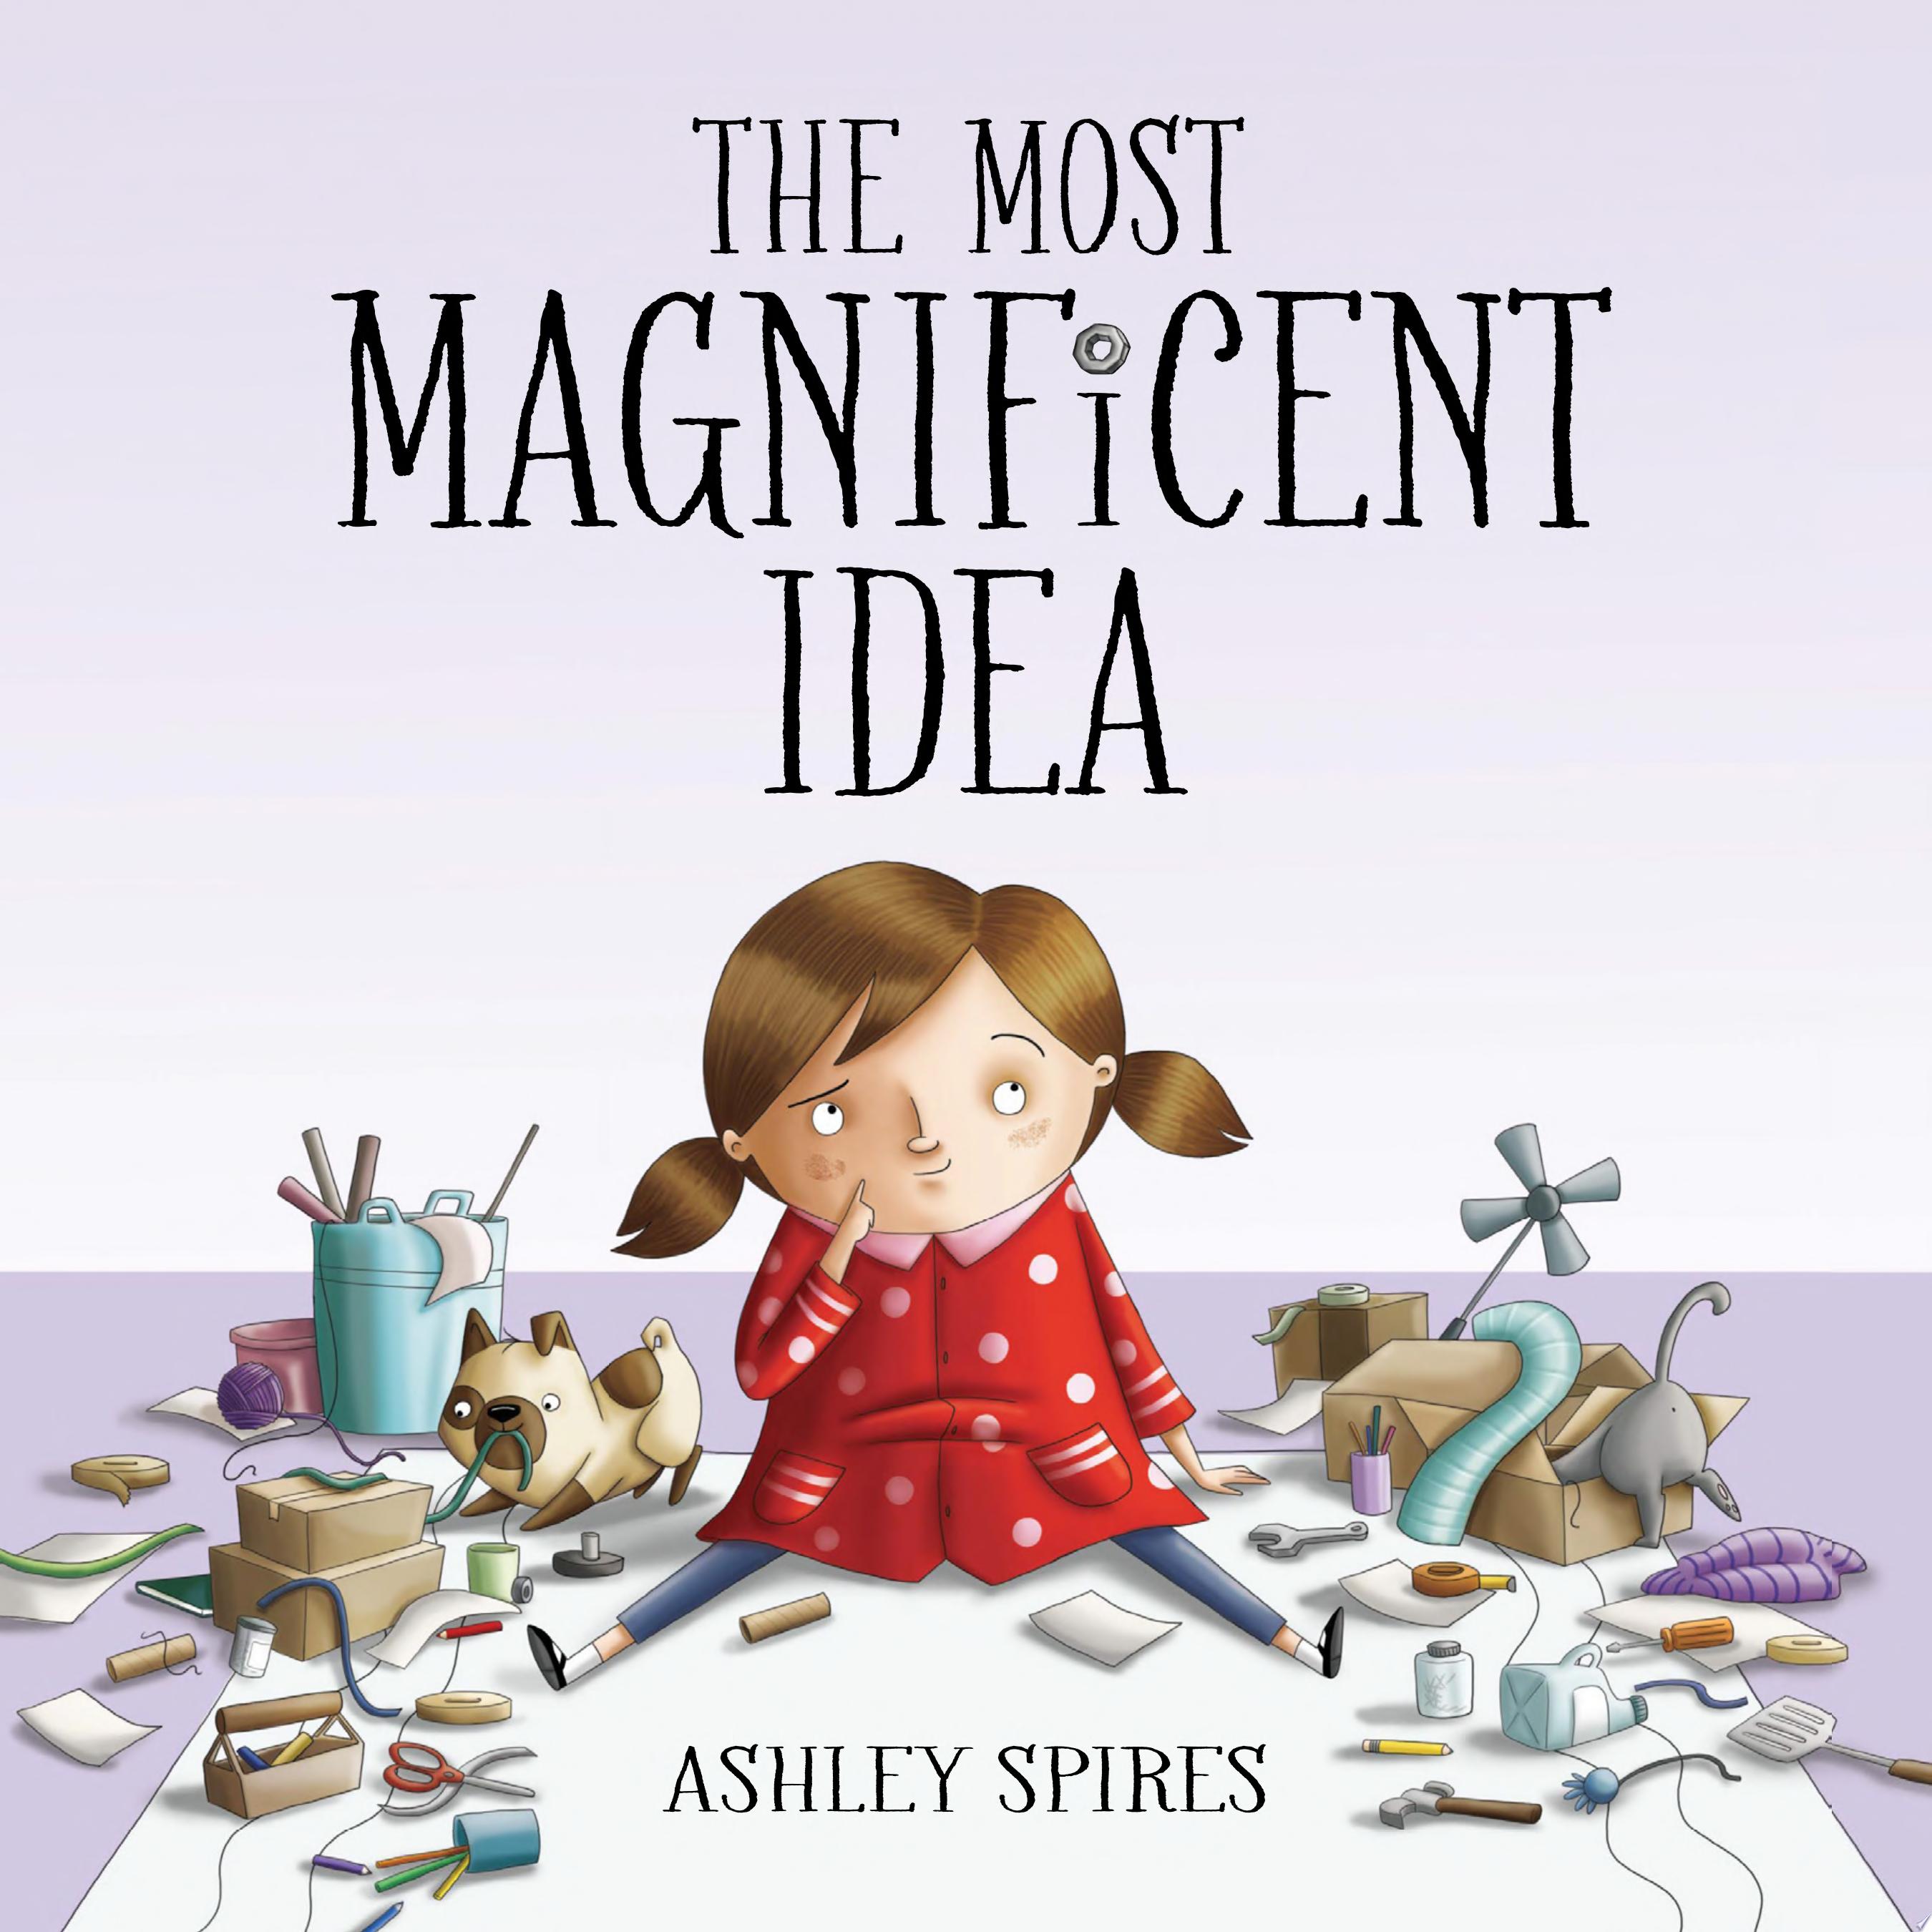 Image for "The Most Magnificent Idea"